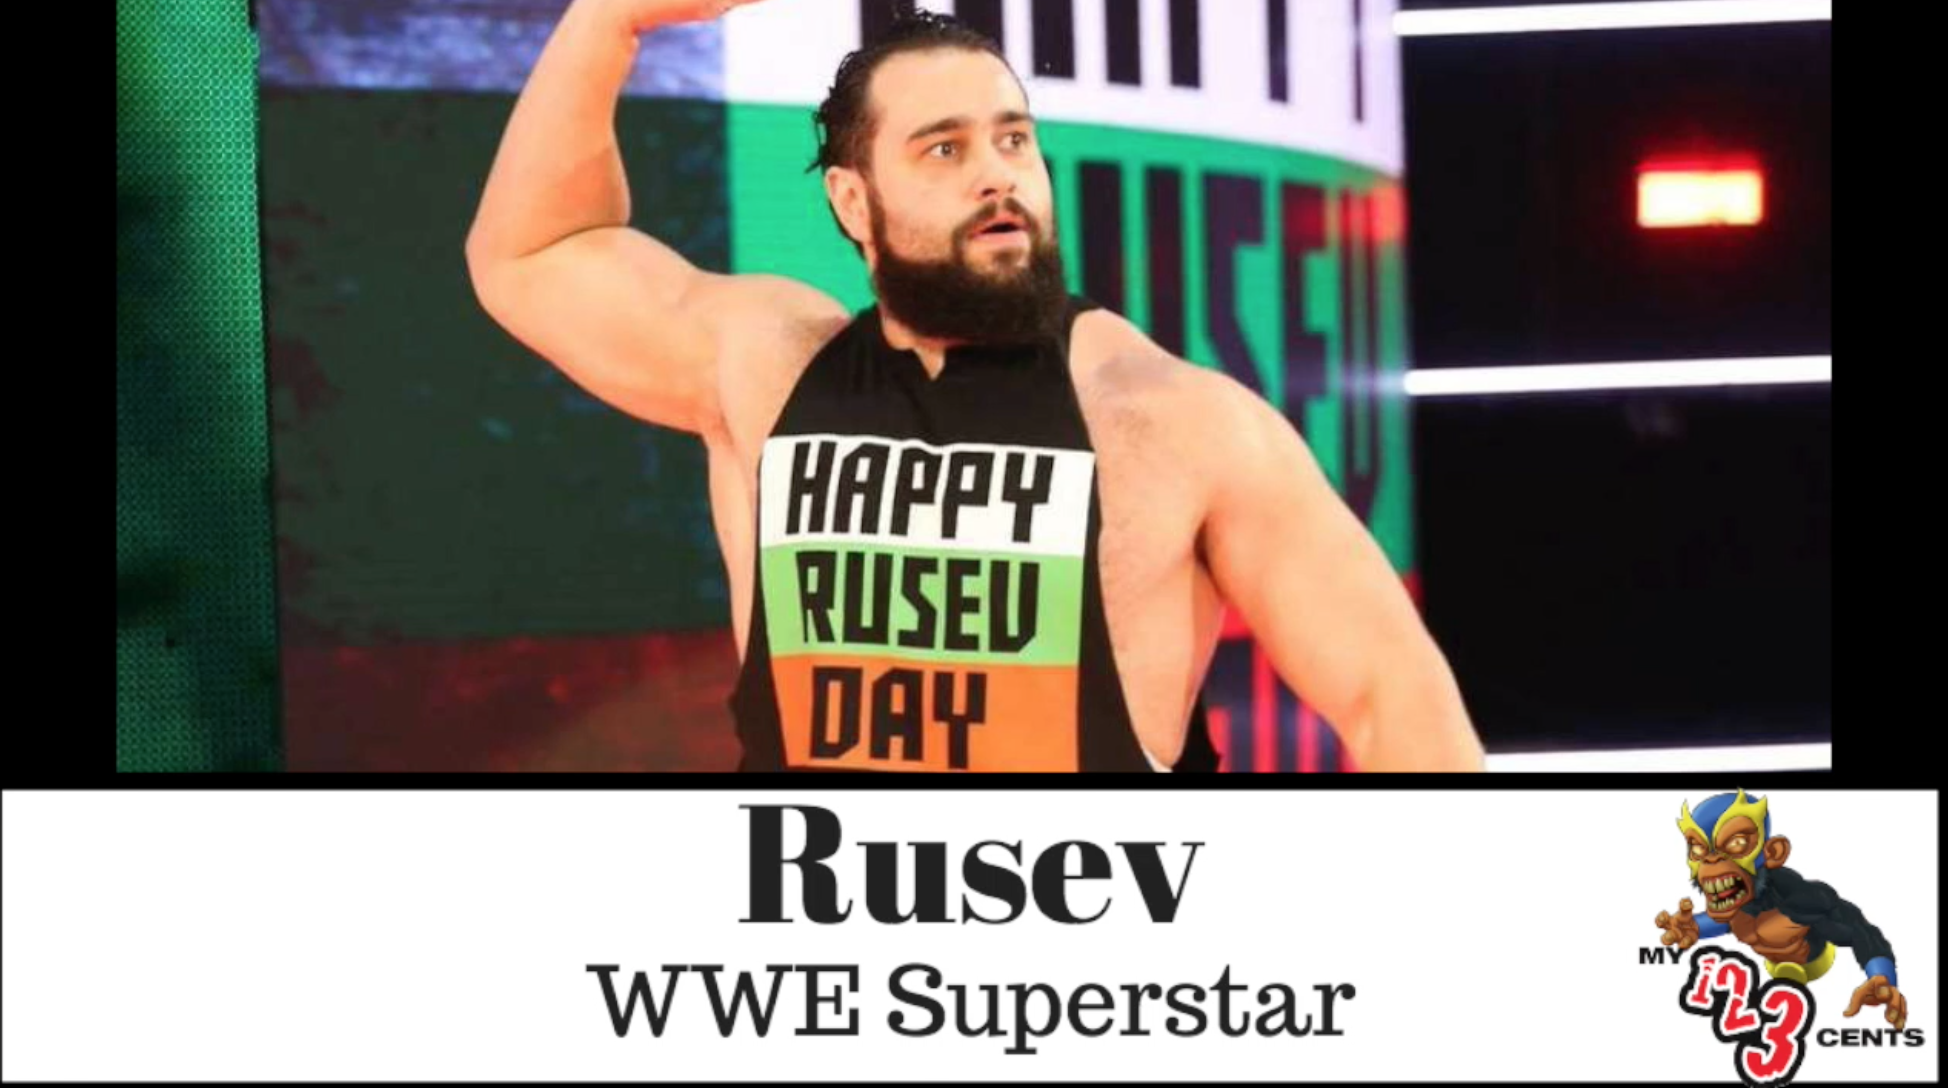 My 1-2-3 Cents Episode 192: Happy Rusev Day